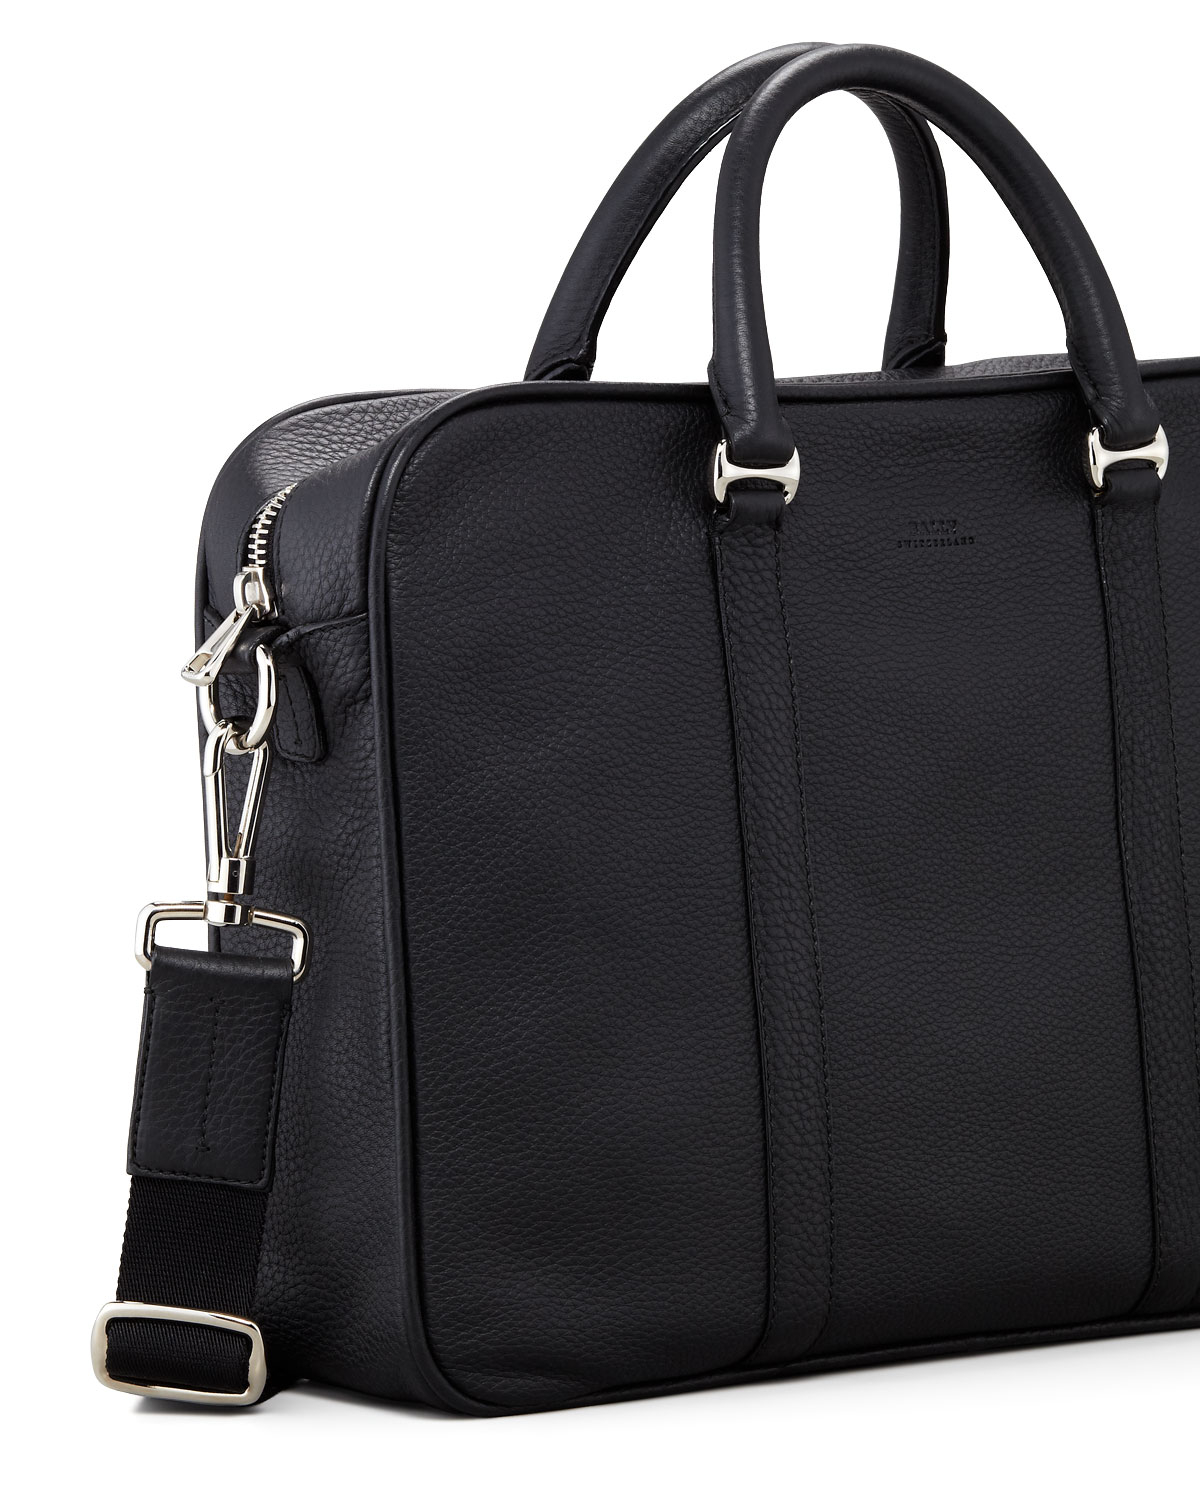 Lyst - Bally Metode Leather Business Bag in Black for Men